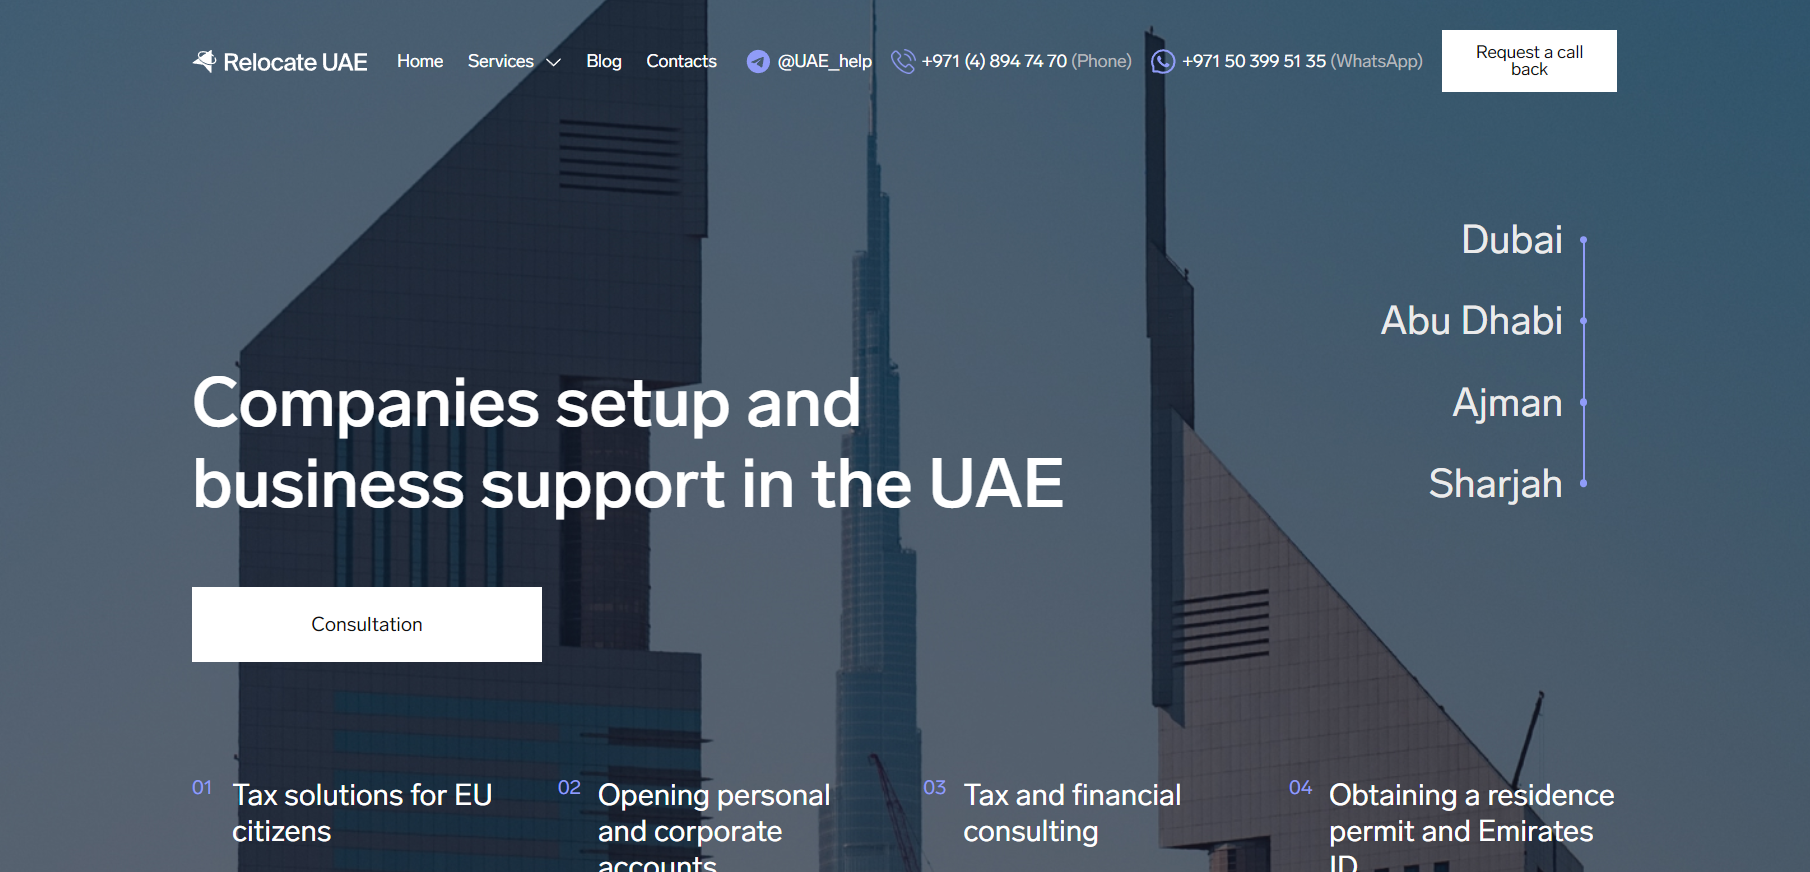 Relocate UAE: The Reality Behind Promises of Consulting Support in Dubai